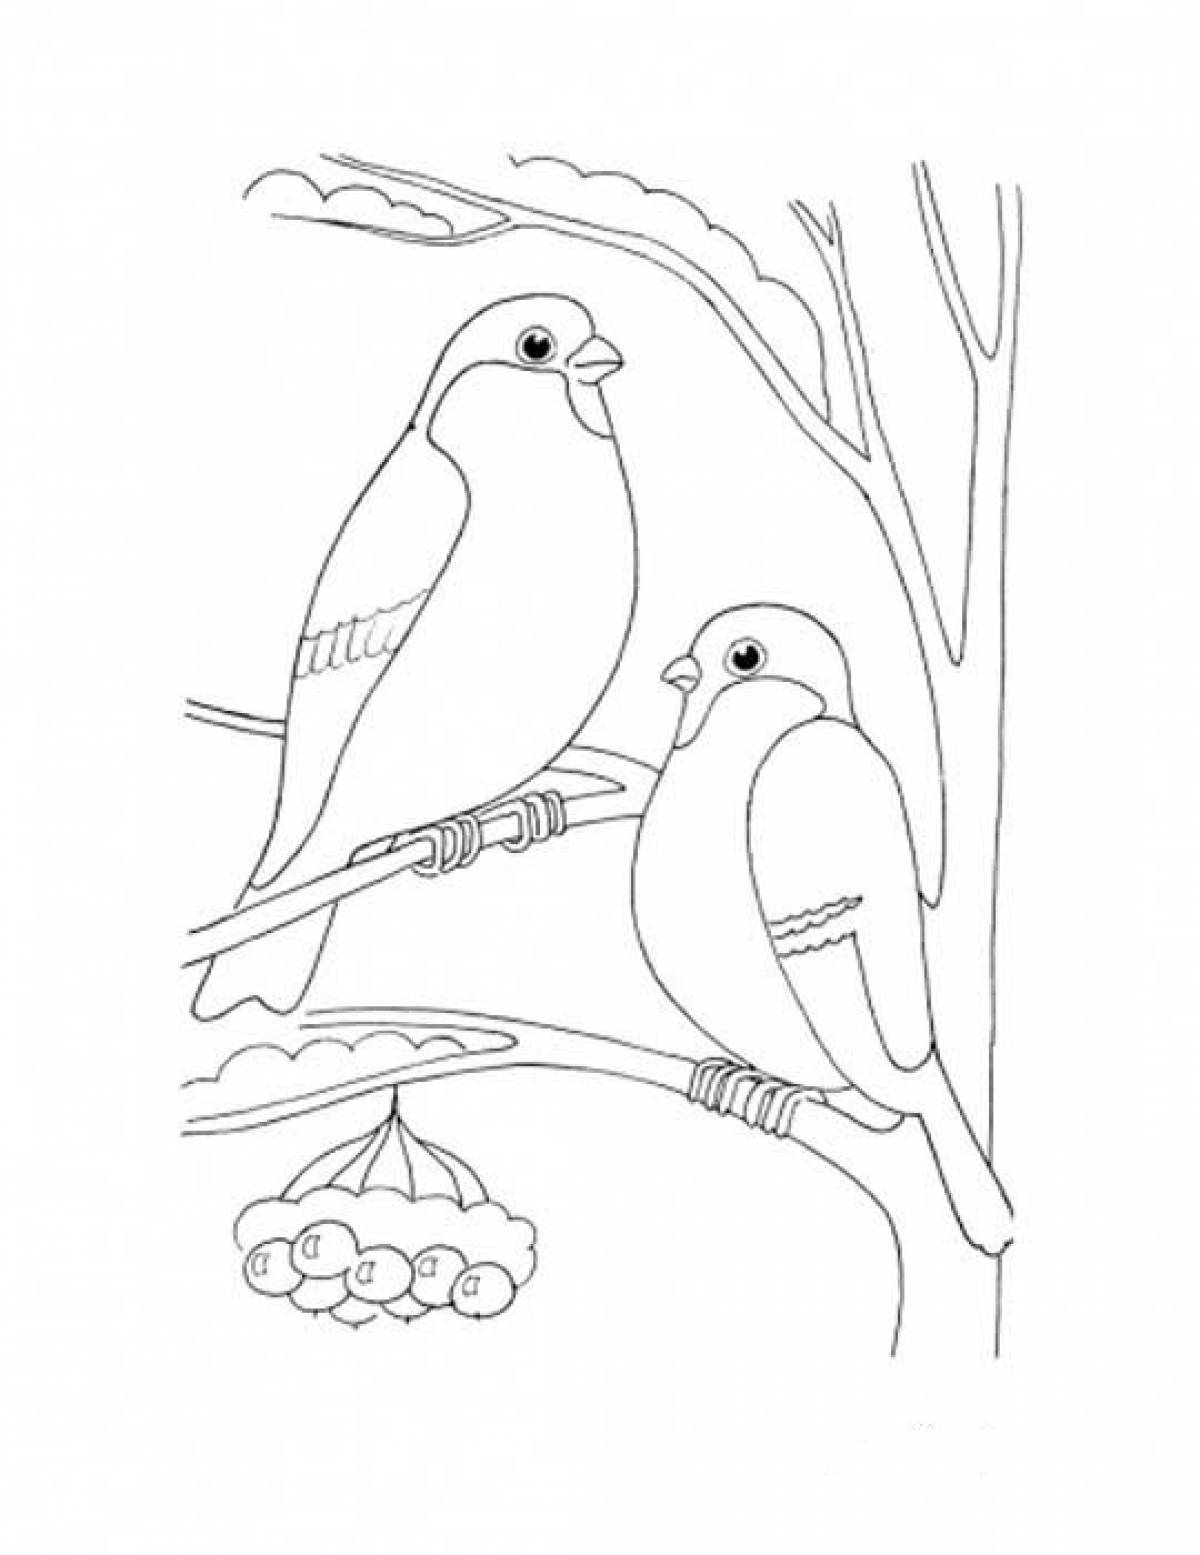 Two birds on a twig print